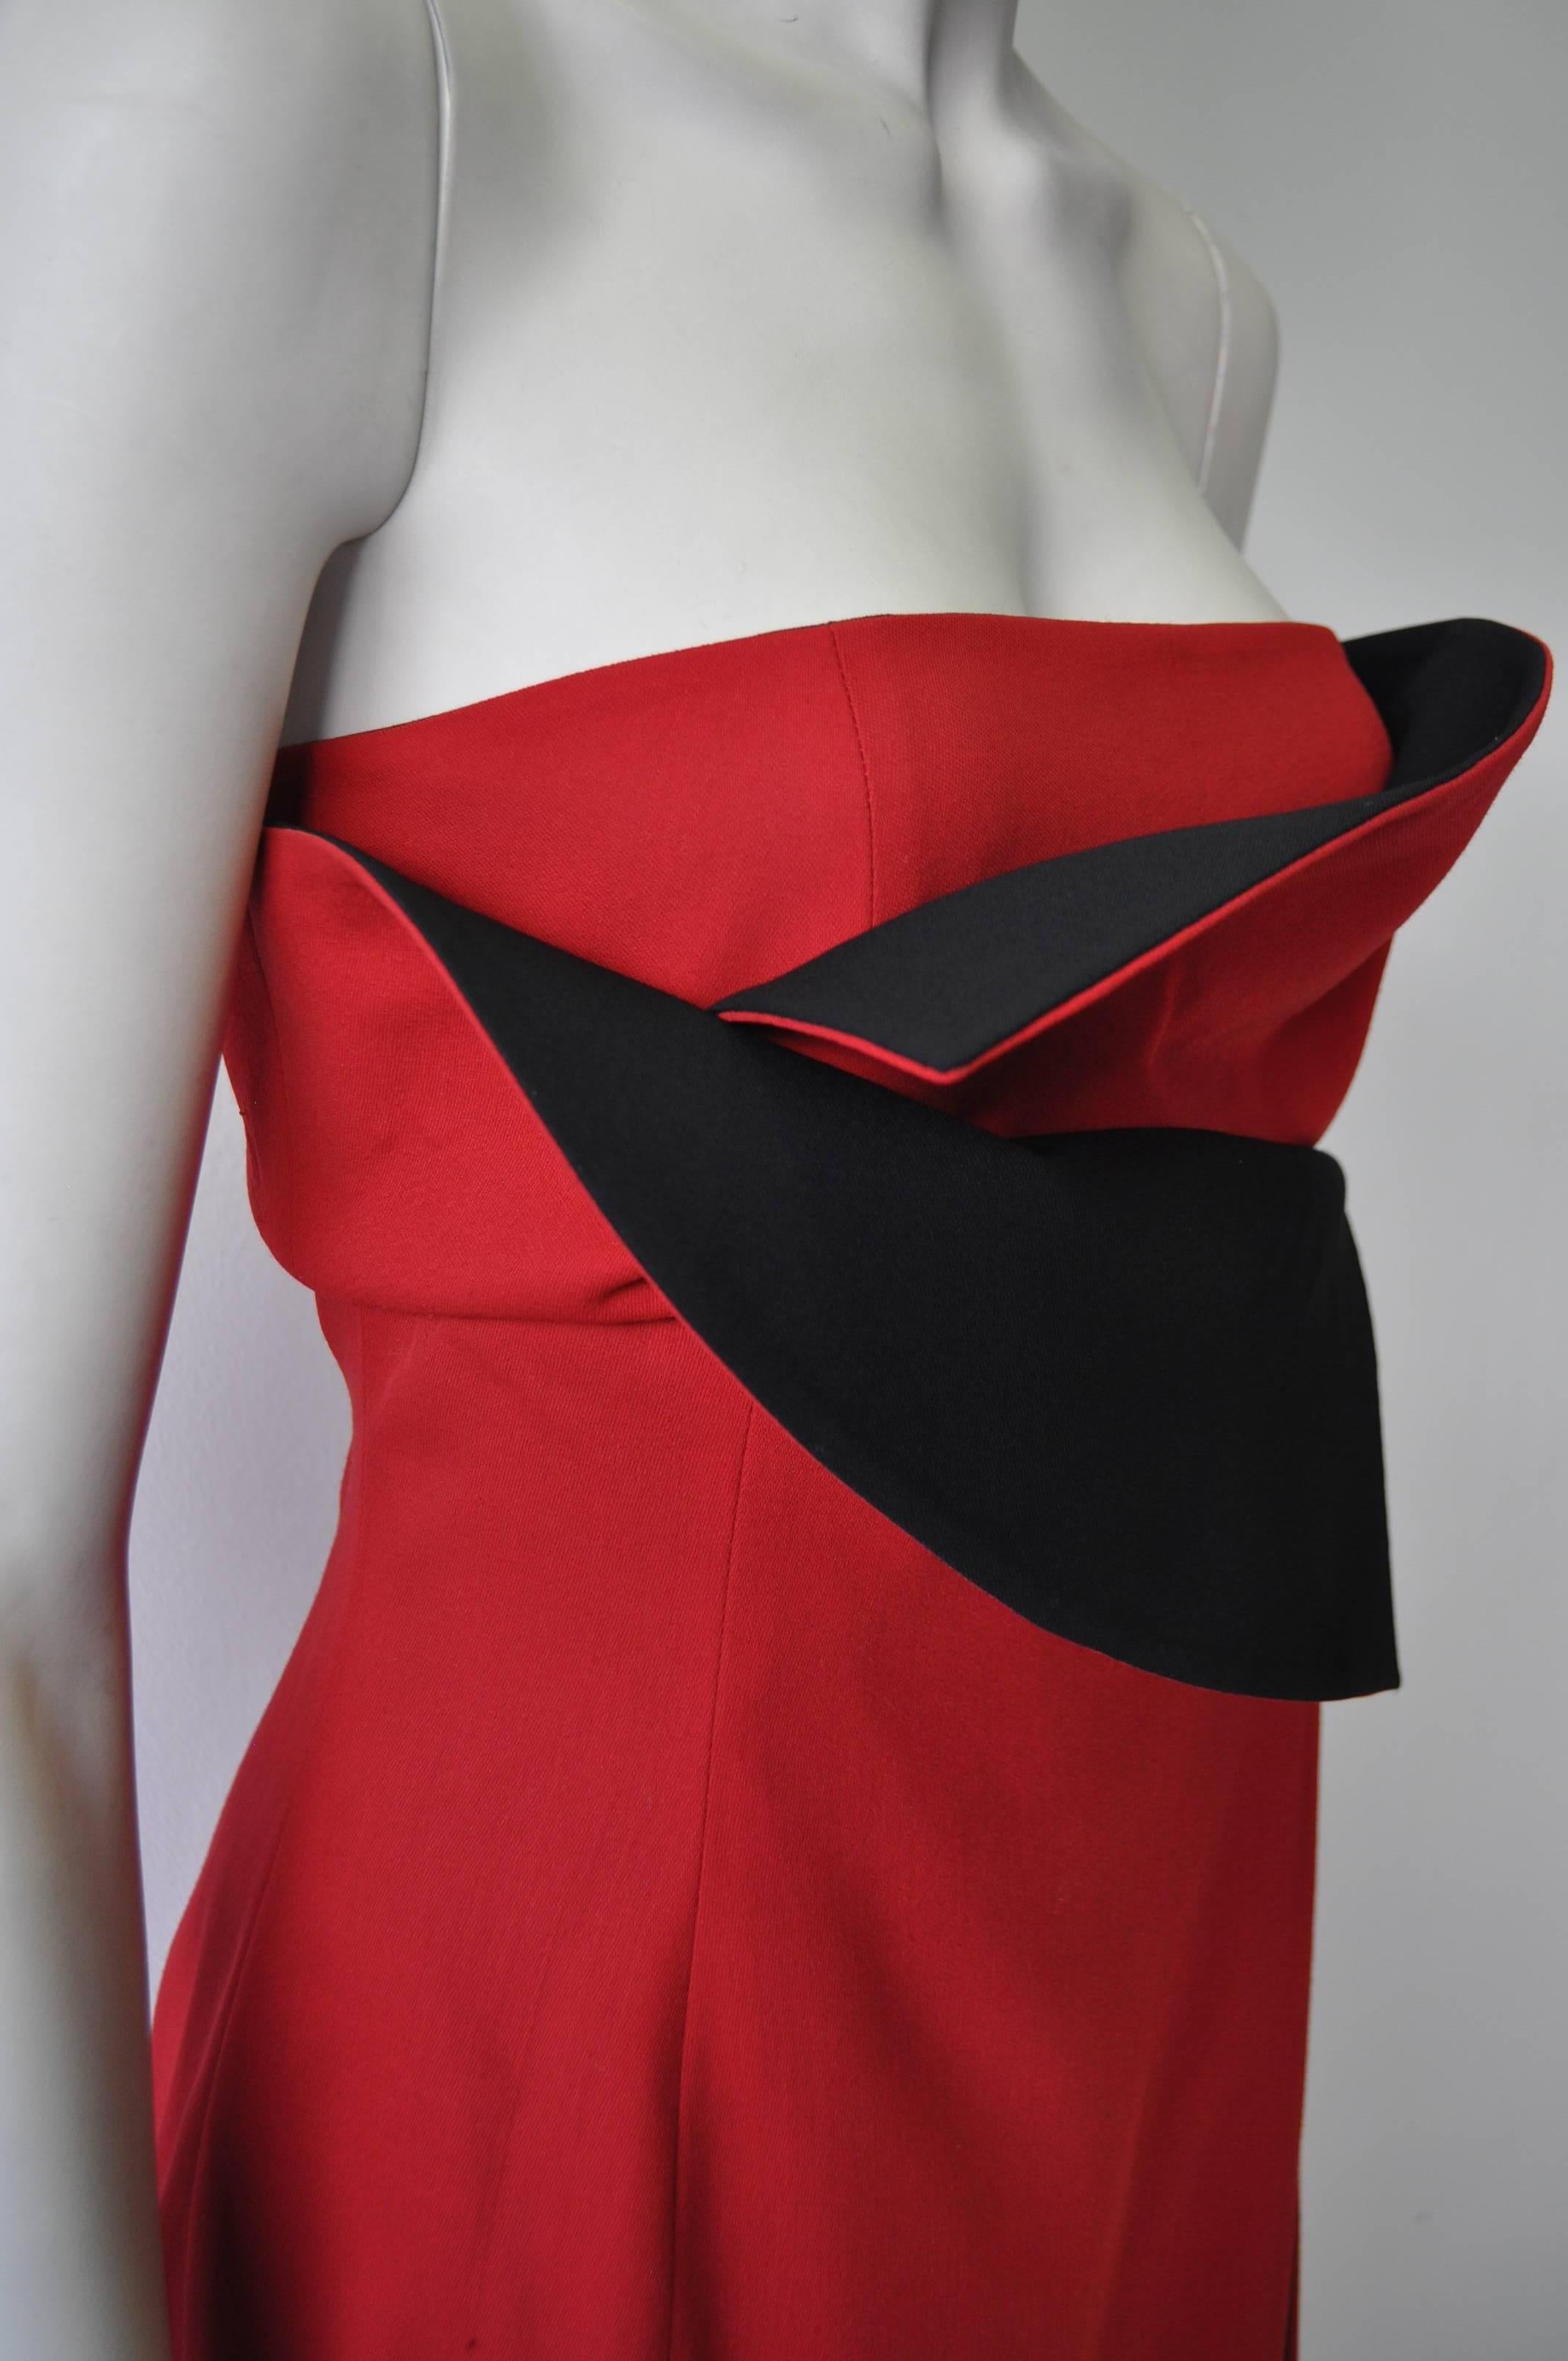 Exceptional Gianfranco Ferre Architectural Rose Petal Dress In New Condition For Sale In Athens, Agia Paraskevi